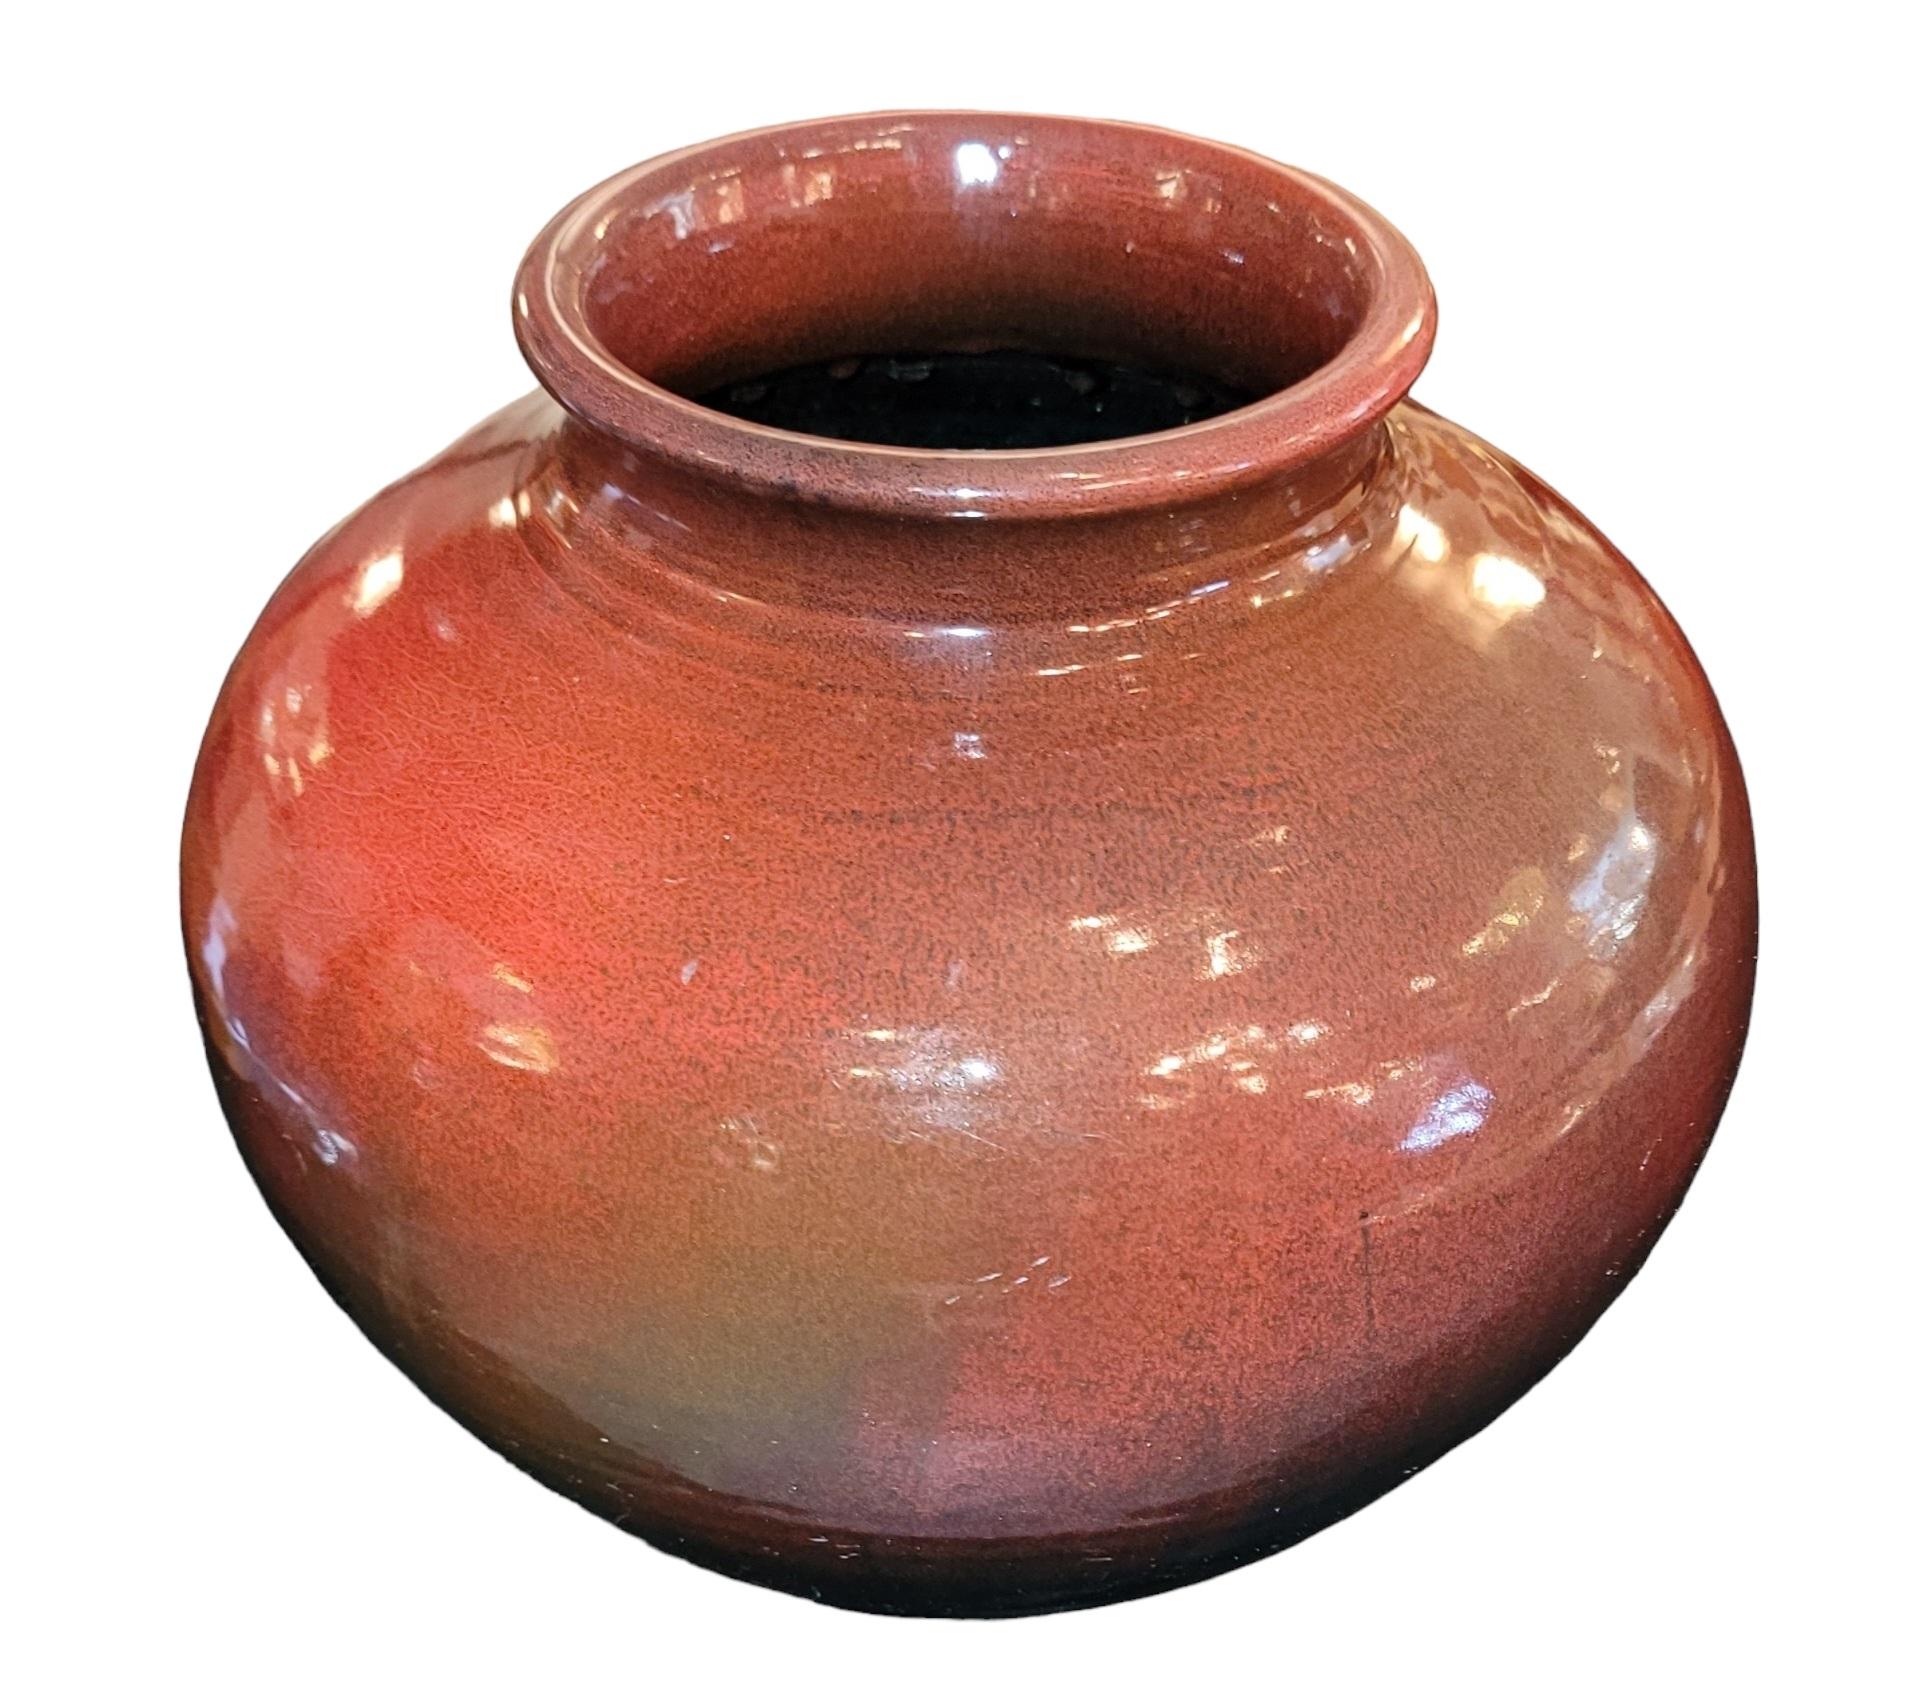 This magnificent pot is glazed in a red into black color.